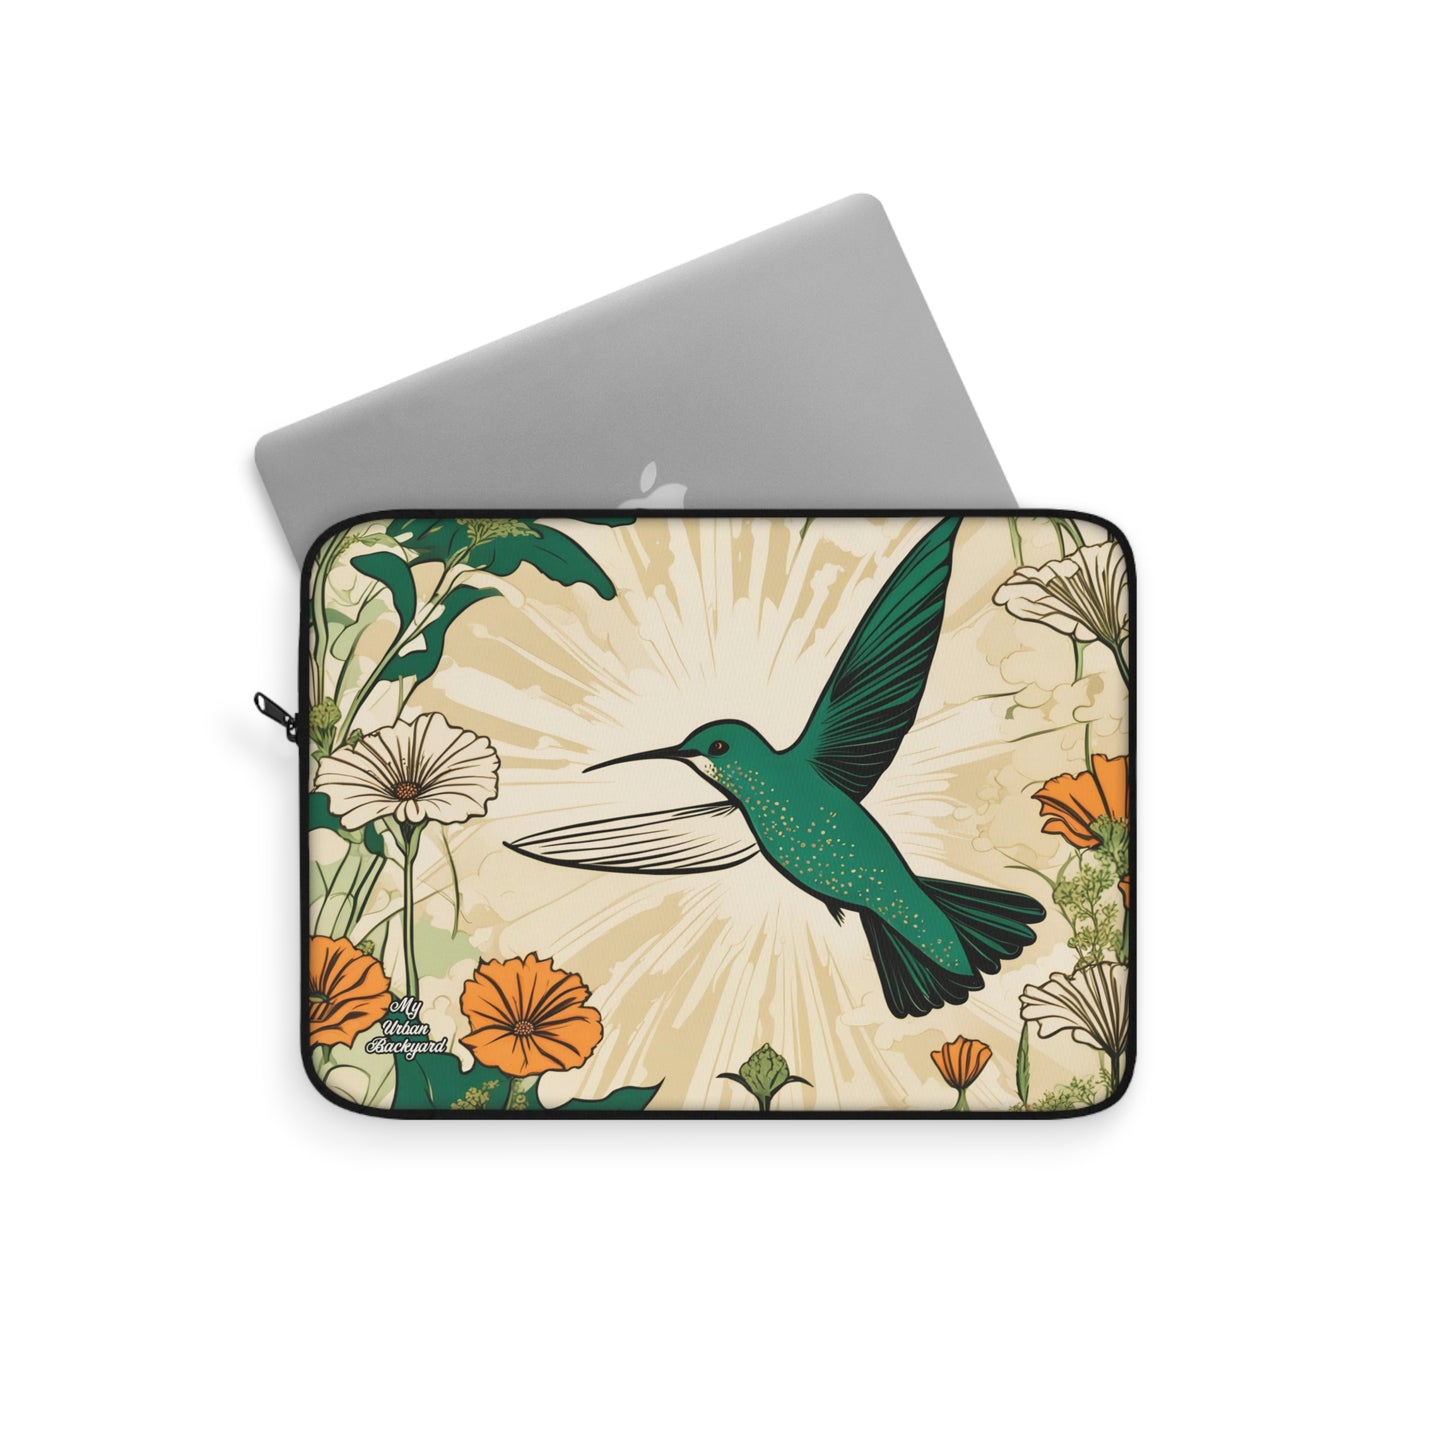 Hummingbird, Laptop Carrying Case, Top Loading Sleeve for School or Work